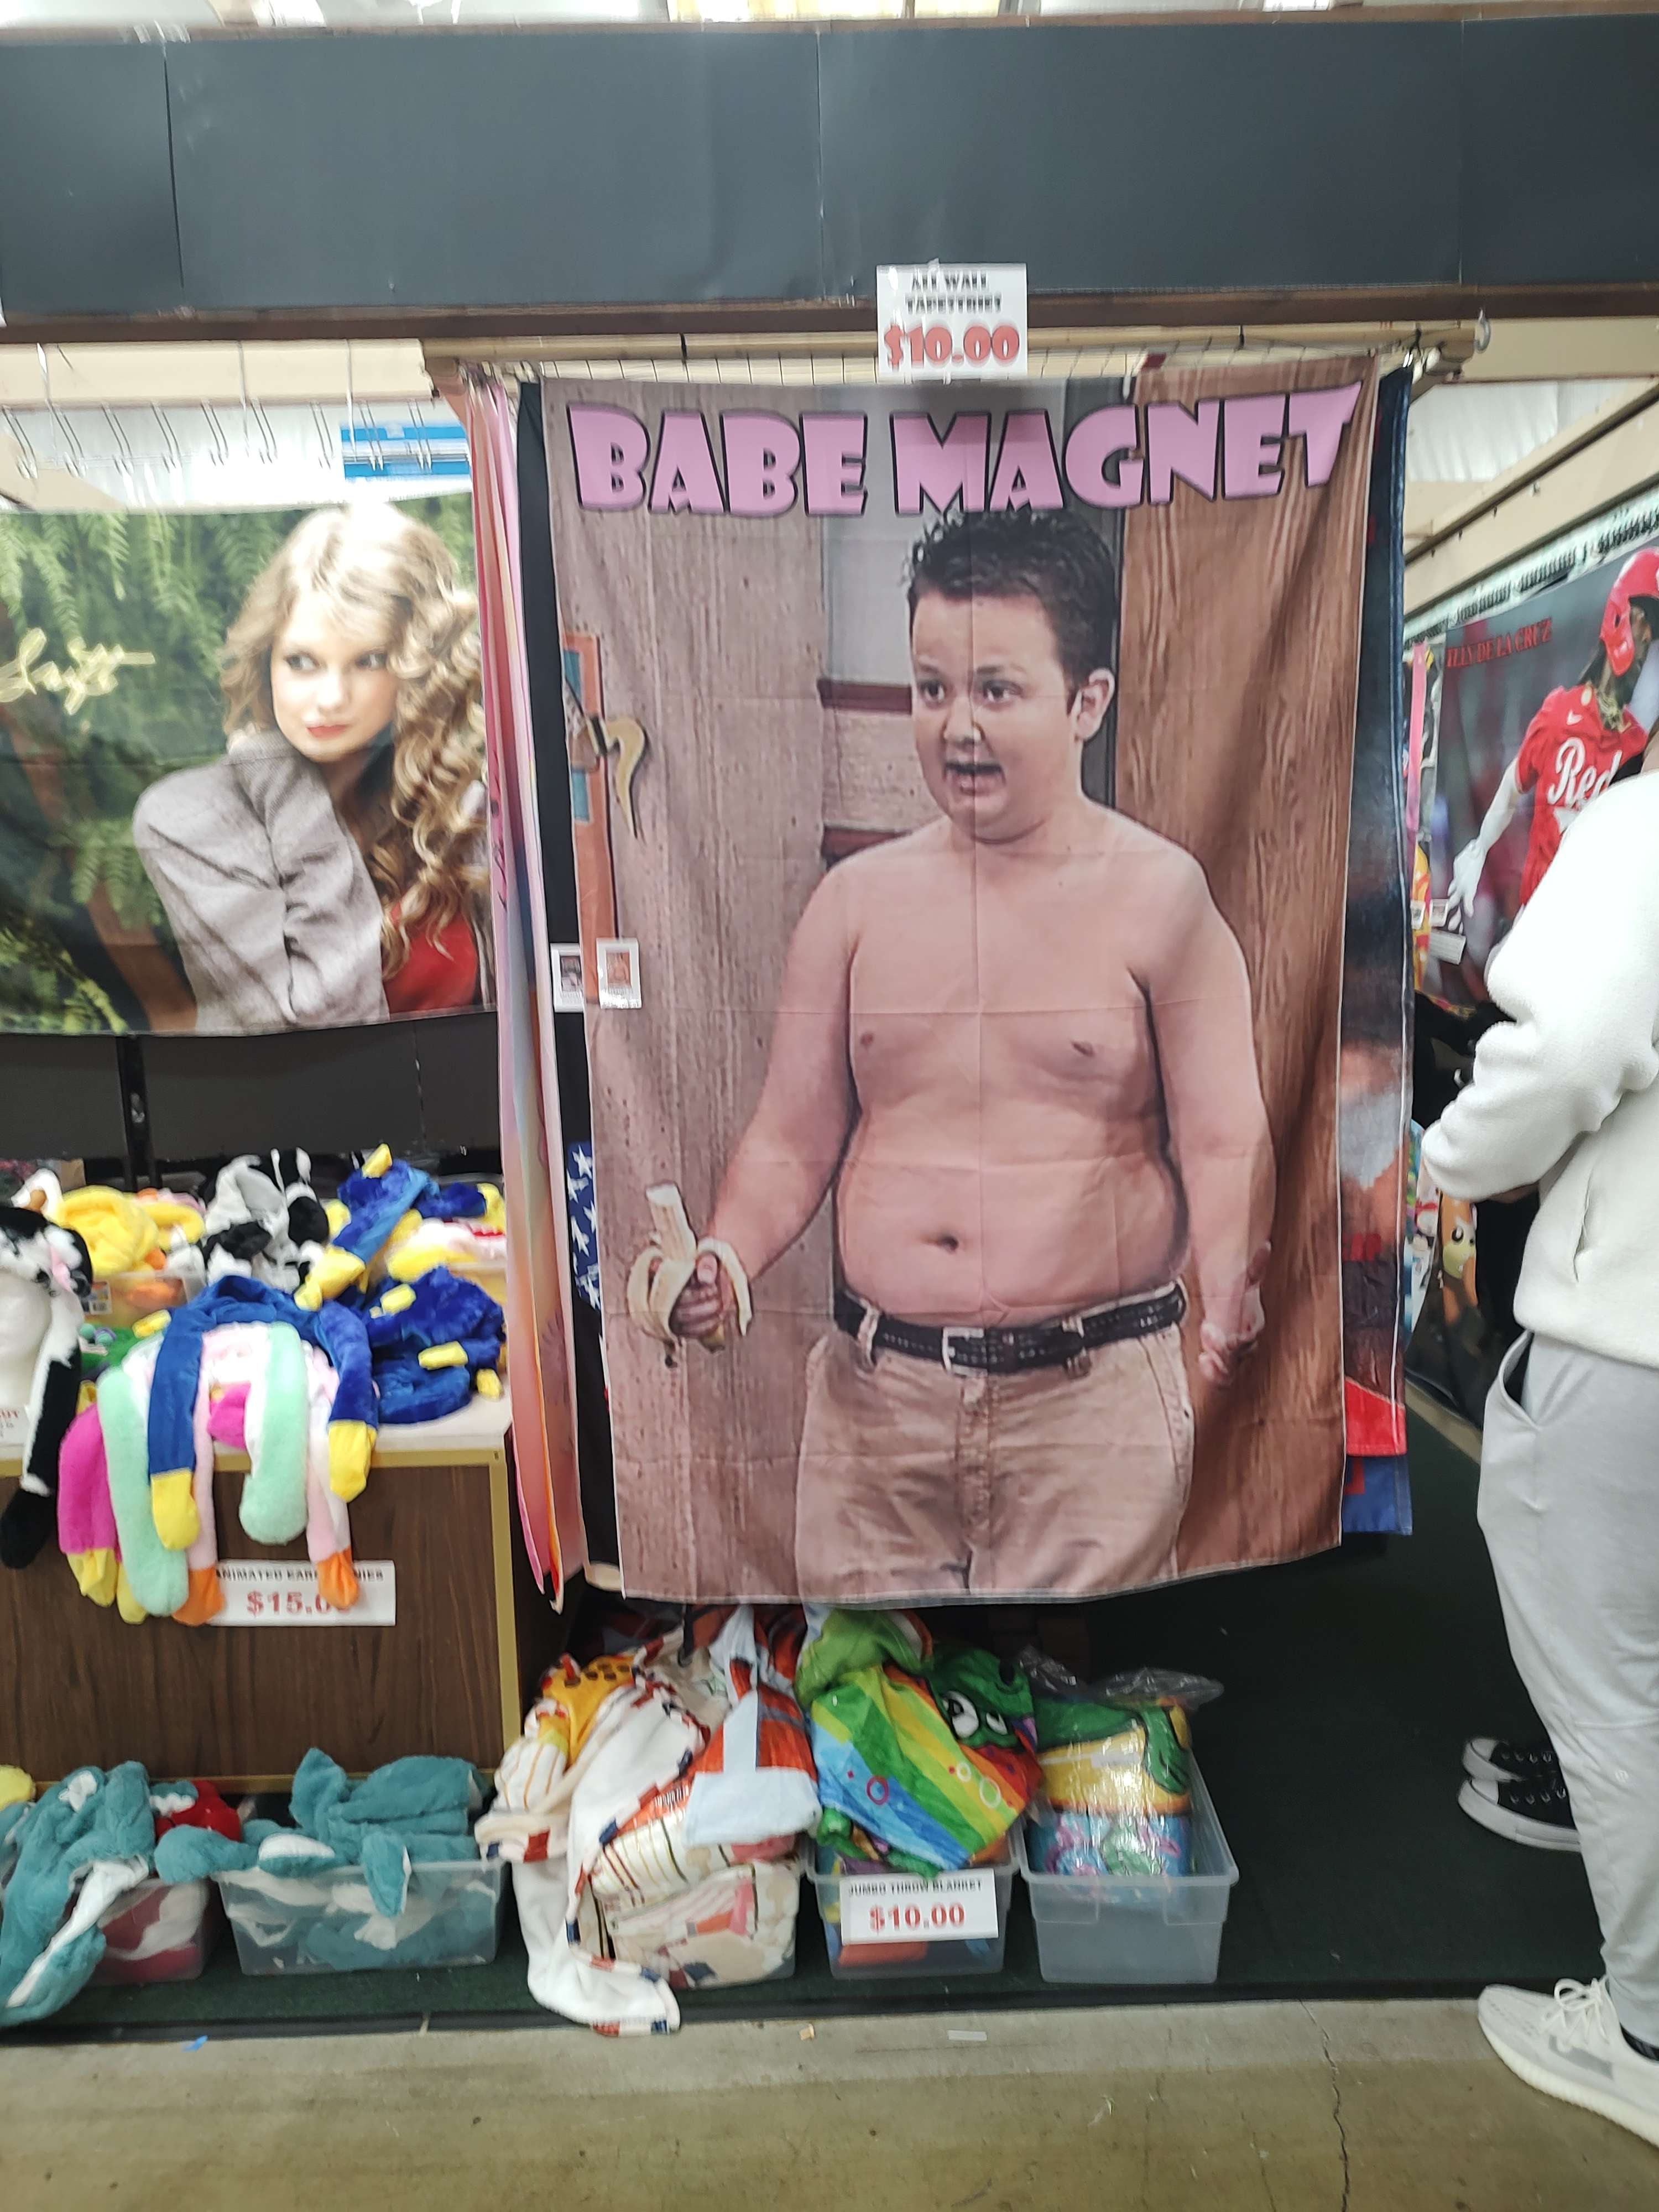 wall tapestry reading 'babe magnet' with an image of gibby from icarly